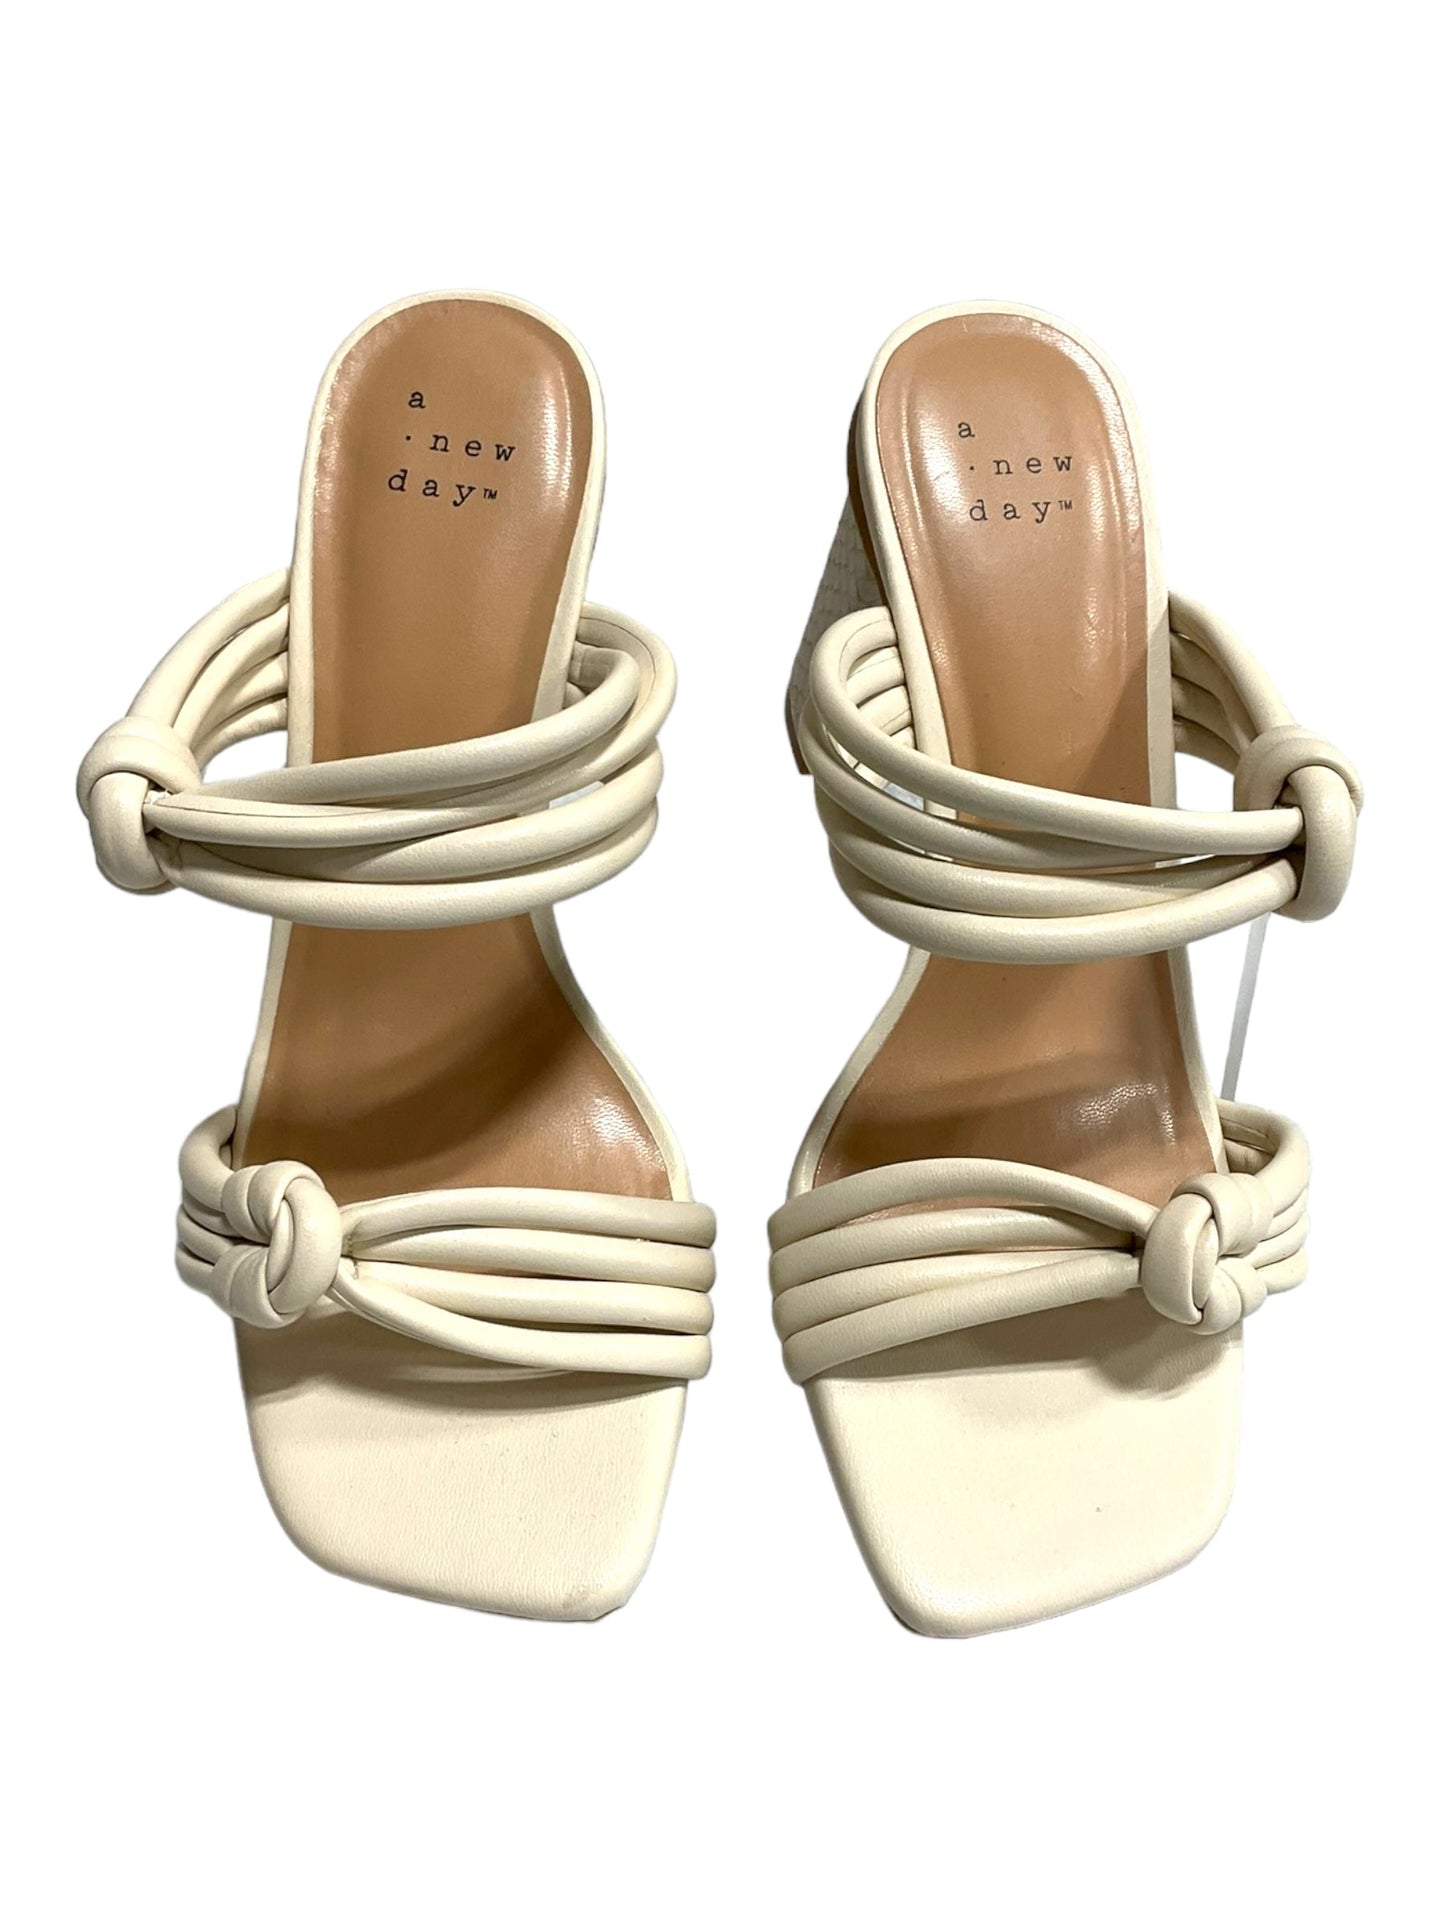 Cream Shoes Heels Block A New Day, Size 6